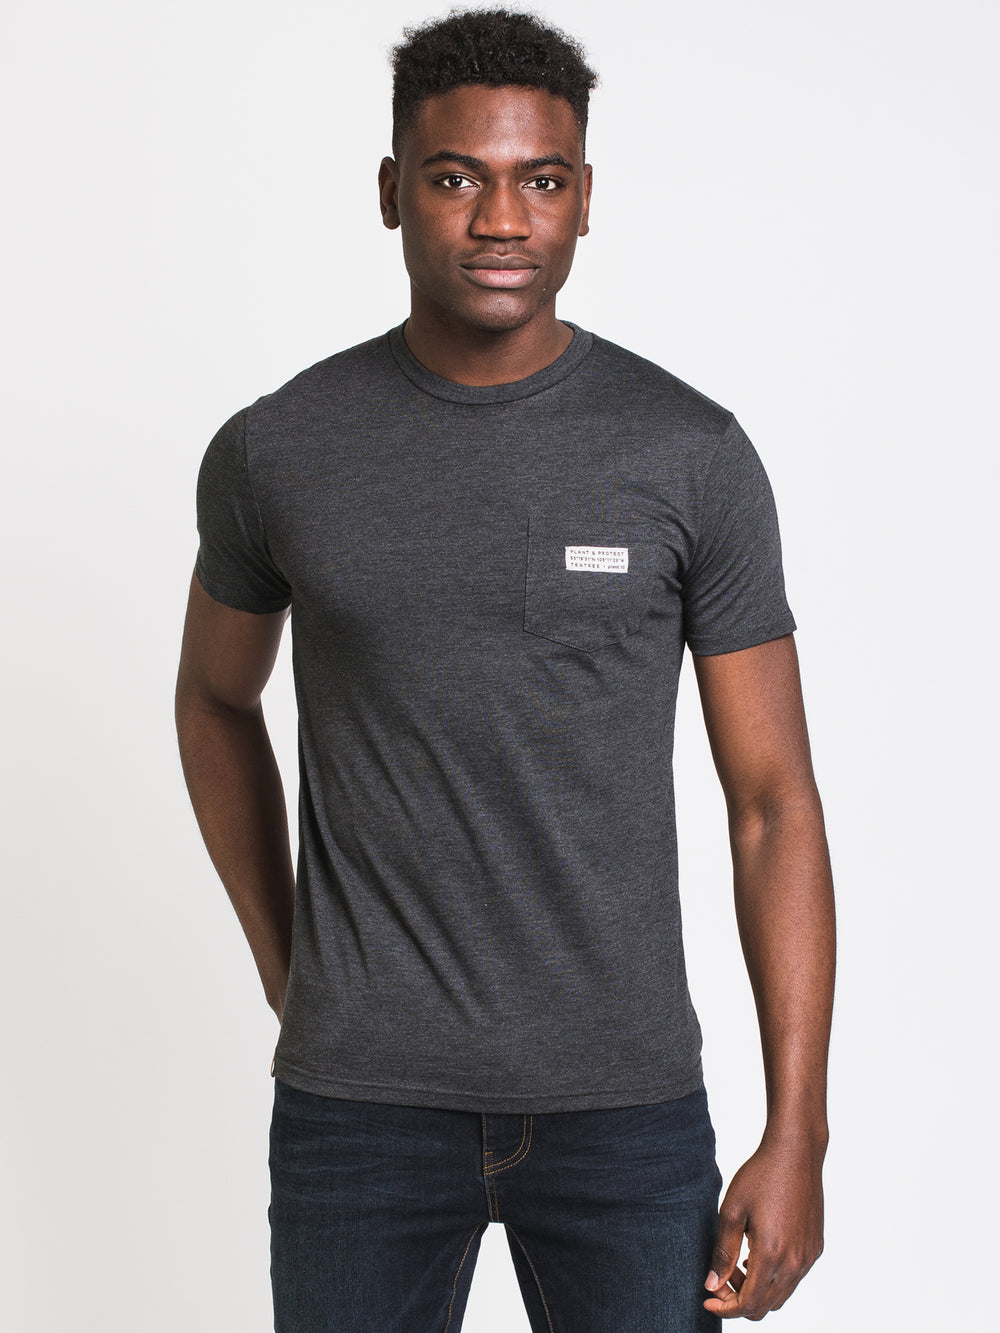 TENTREE PATCH POCKET T-SHIRT  - CLEARANCE